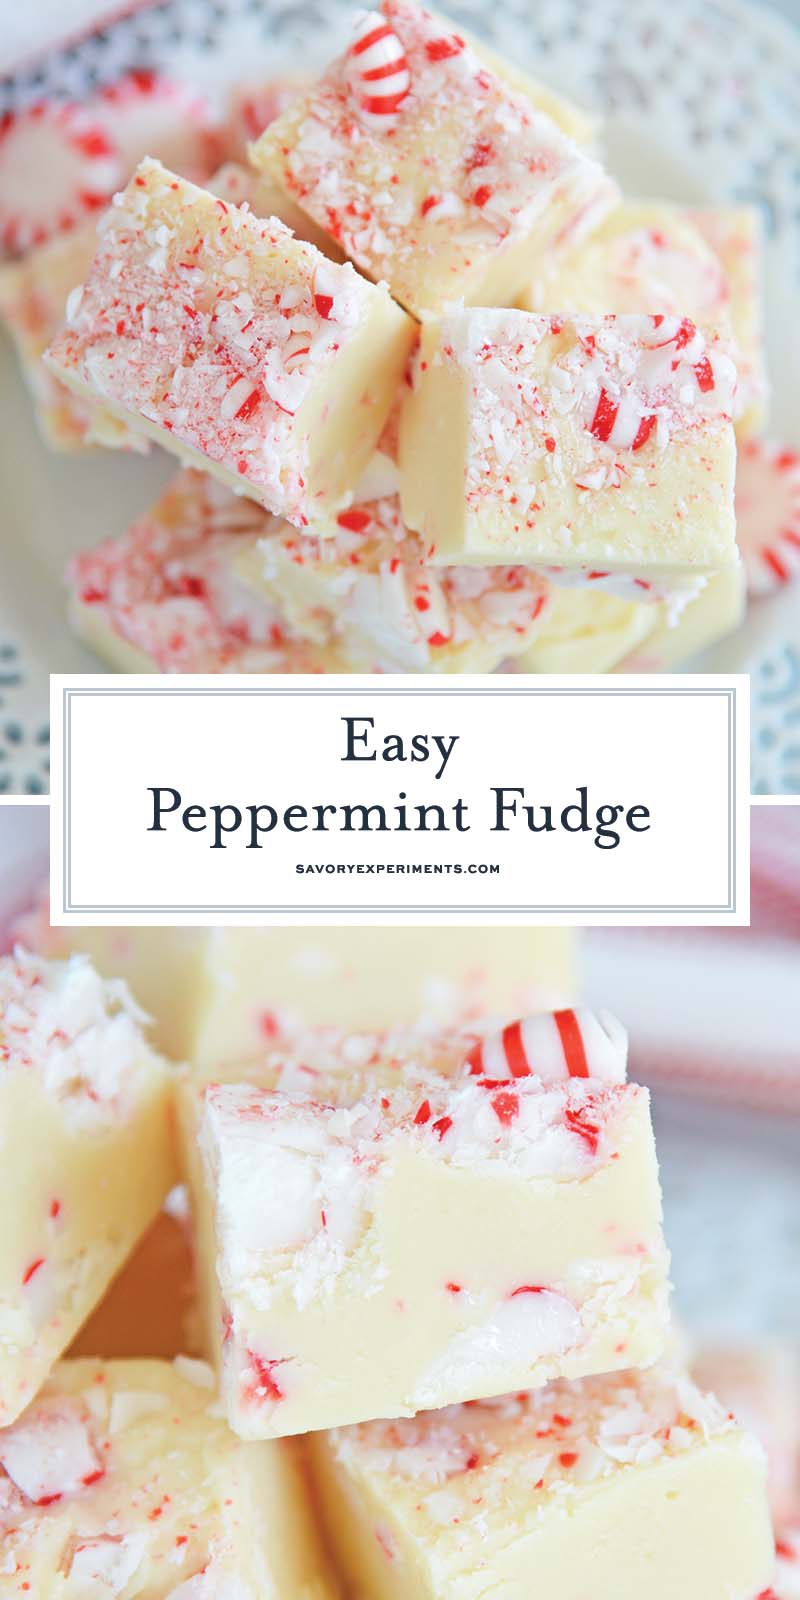 peppermint fudge collage for pinterest